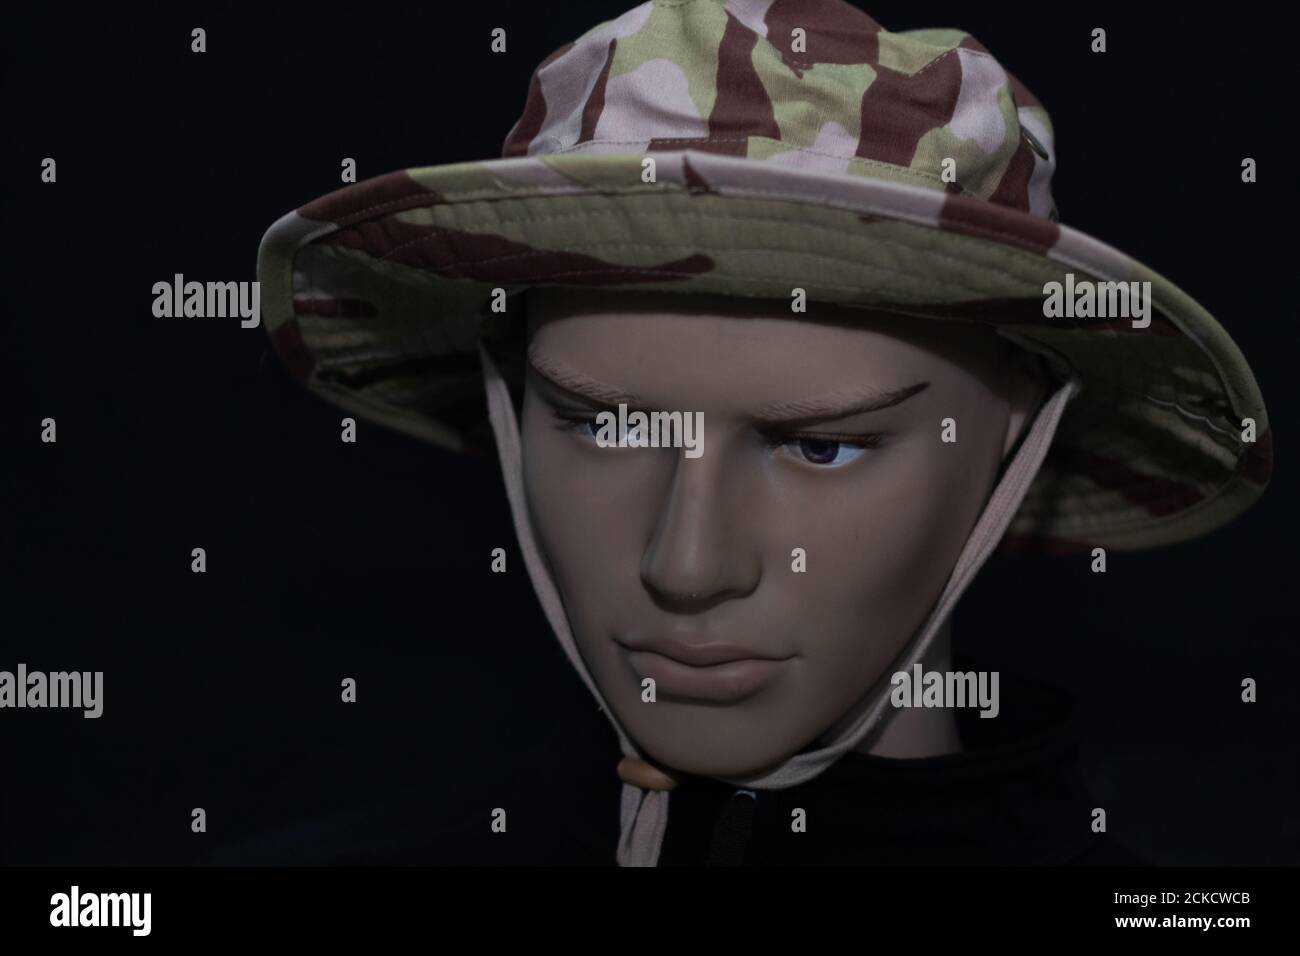 Mannequin face in a military cap isolated on a black background Stock Photo